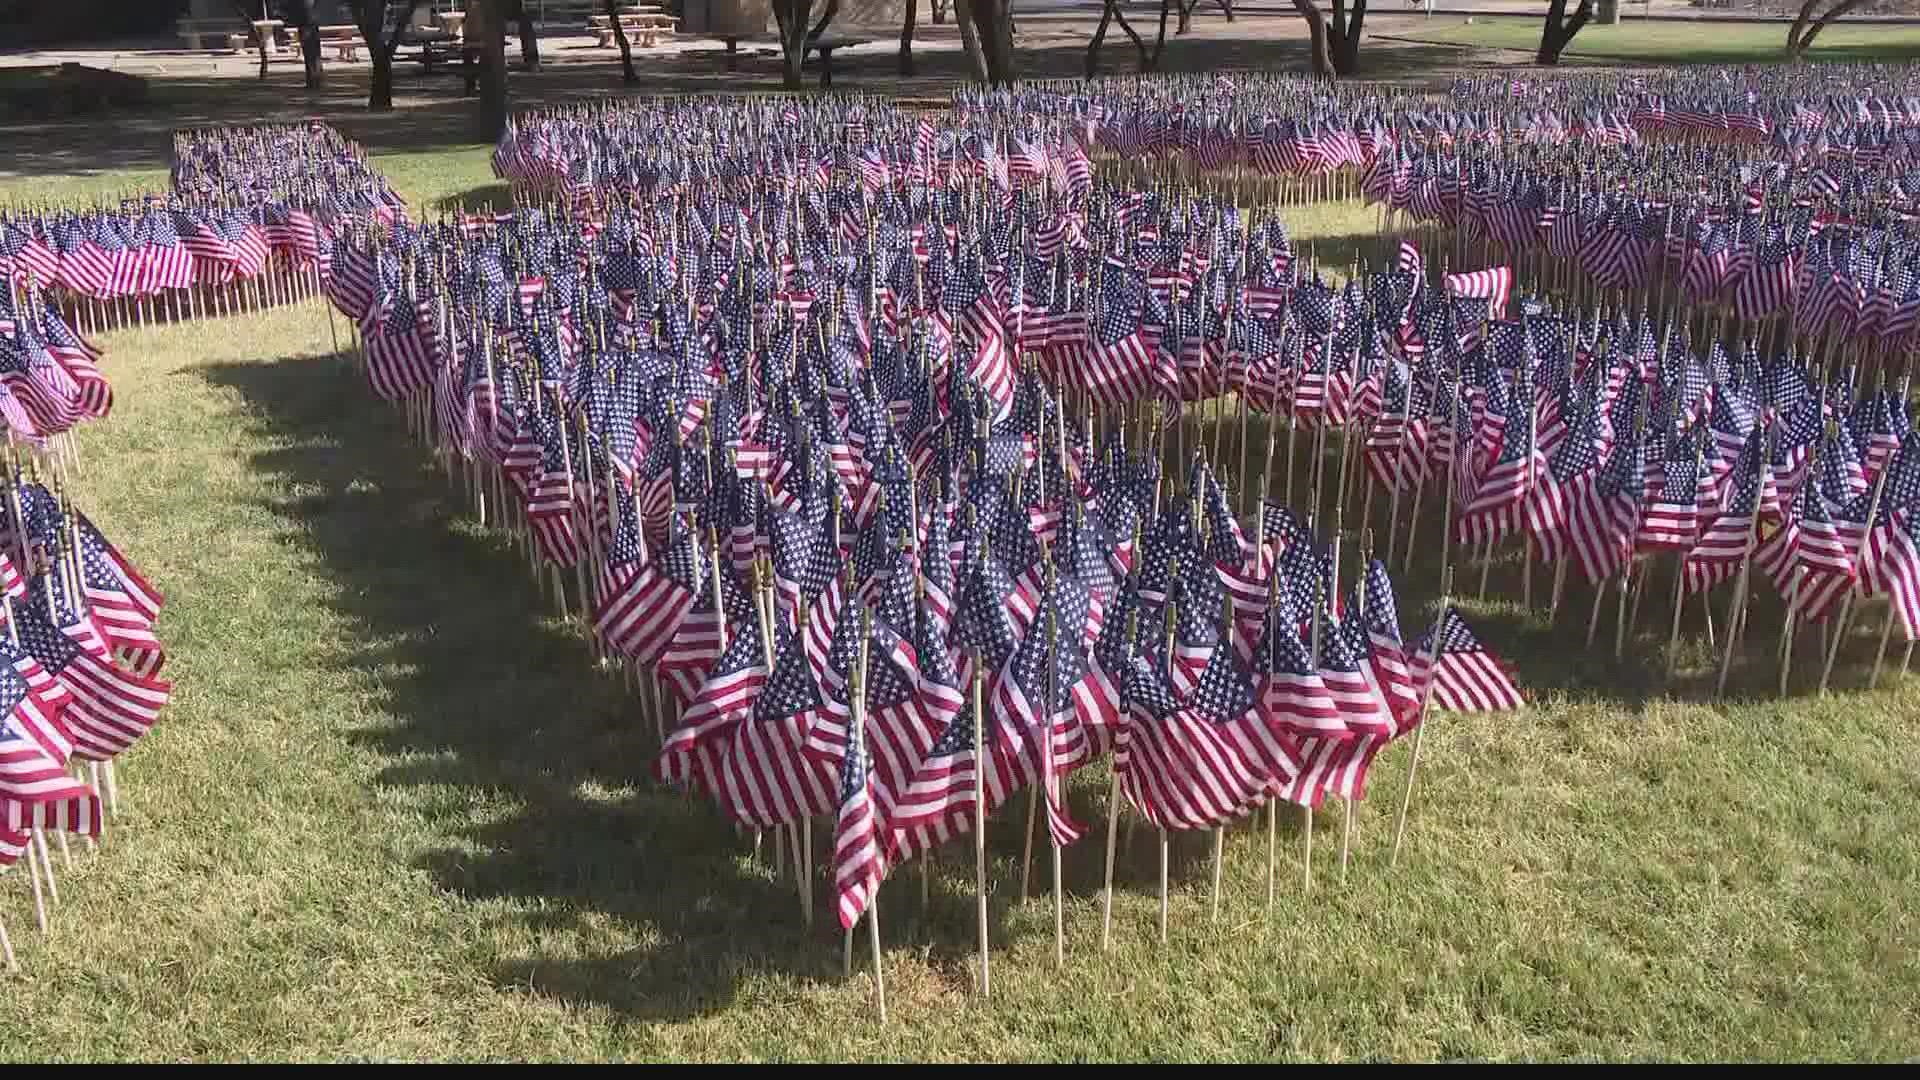 The University of Phoenix hosted its annual Memorial Day flag planting honoring fallen soldiers. After the planting of the flags a Memorial Day ceremony was held.